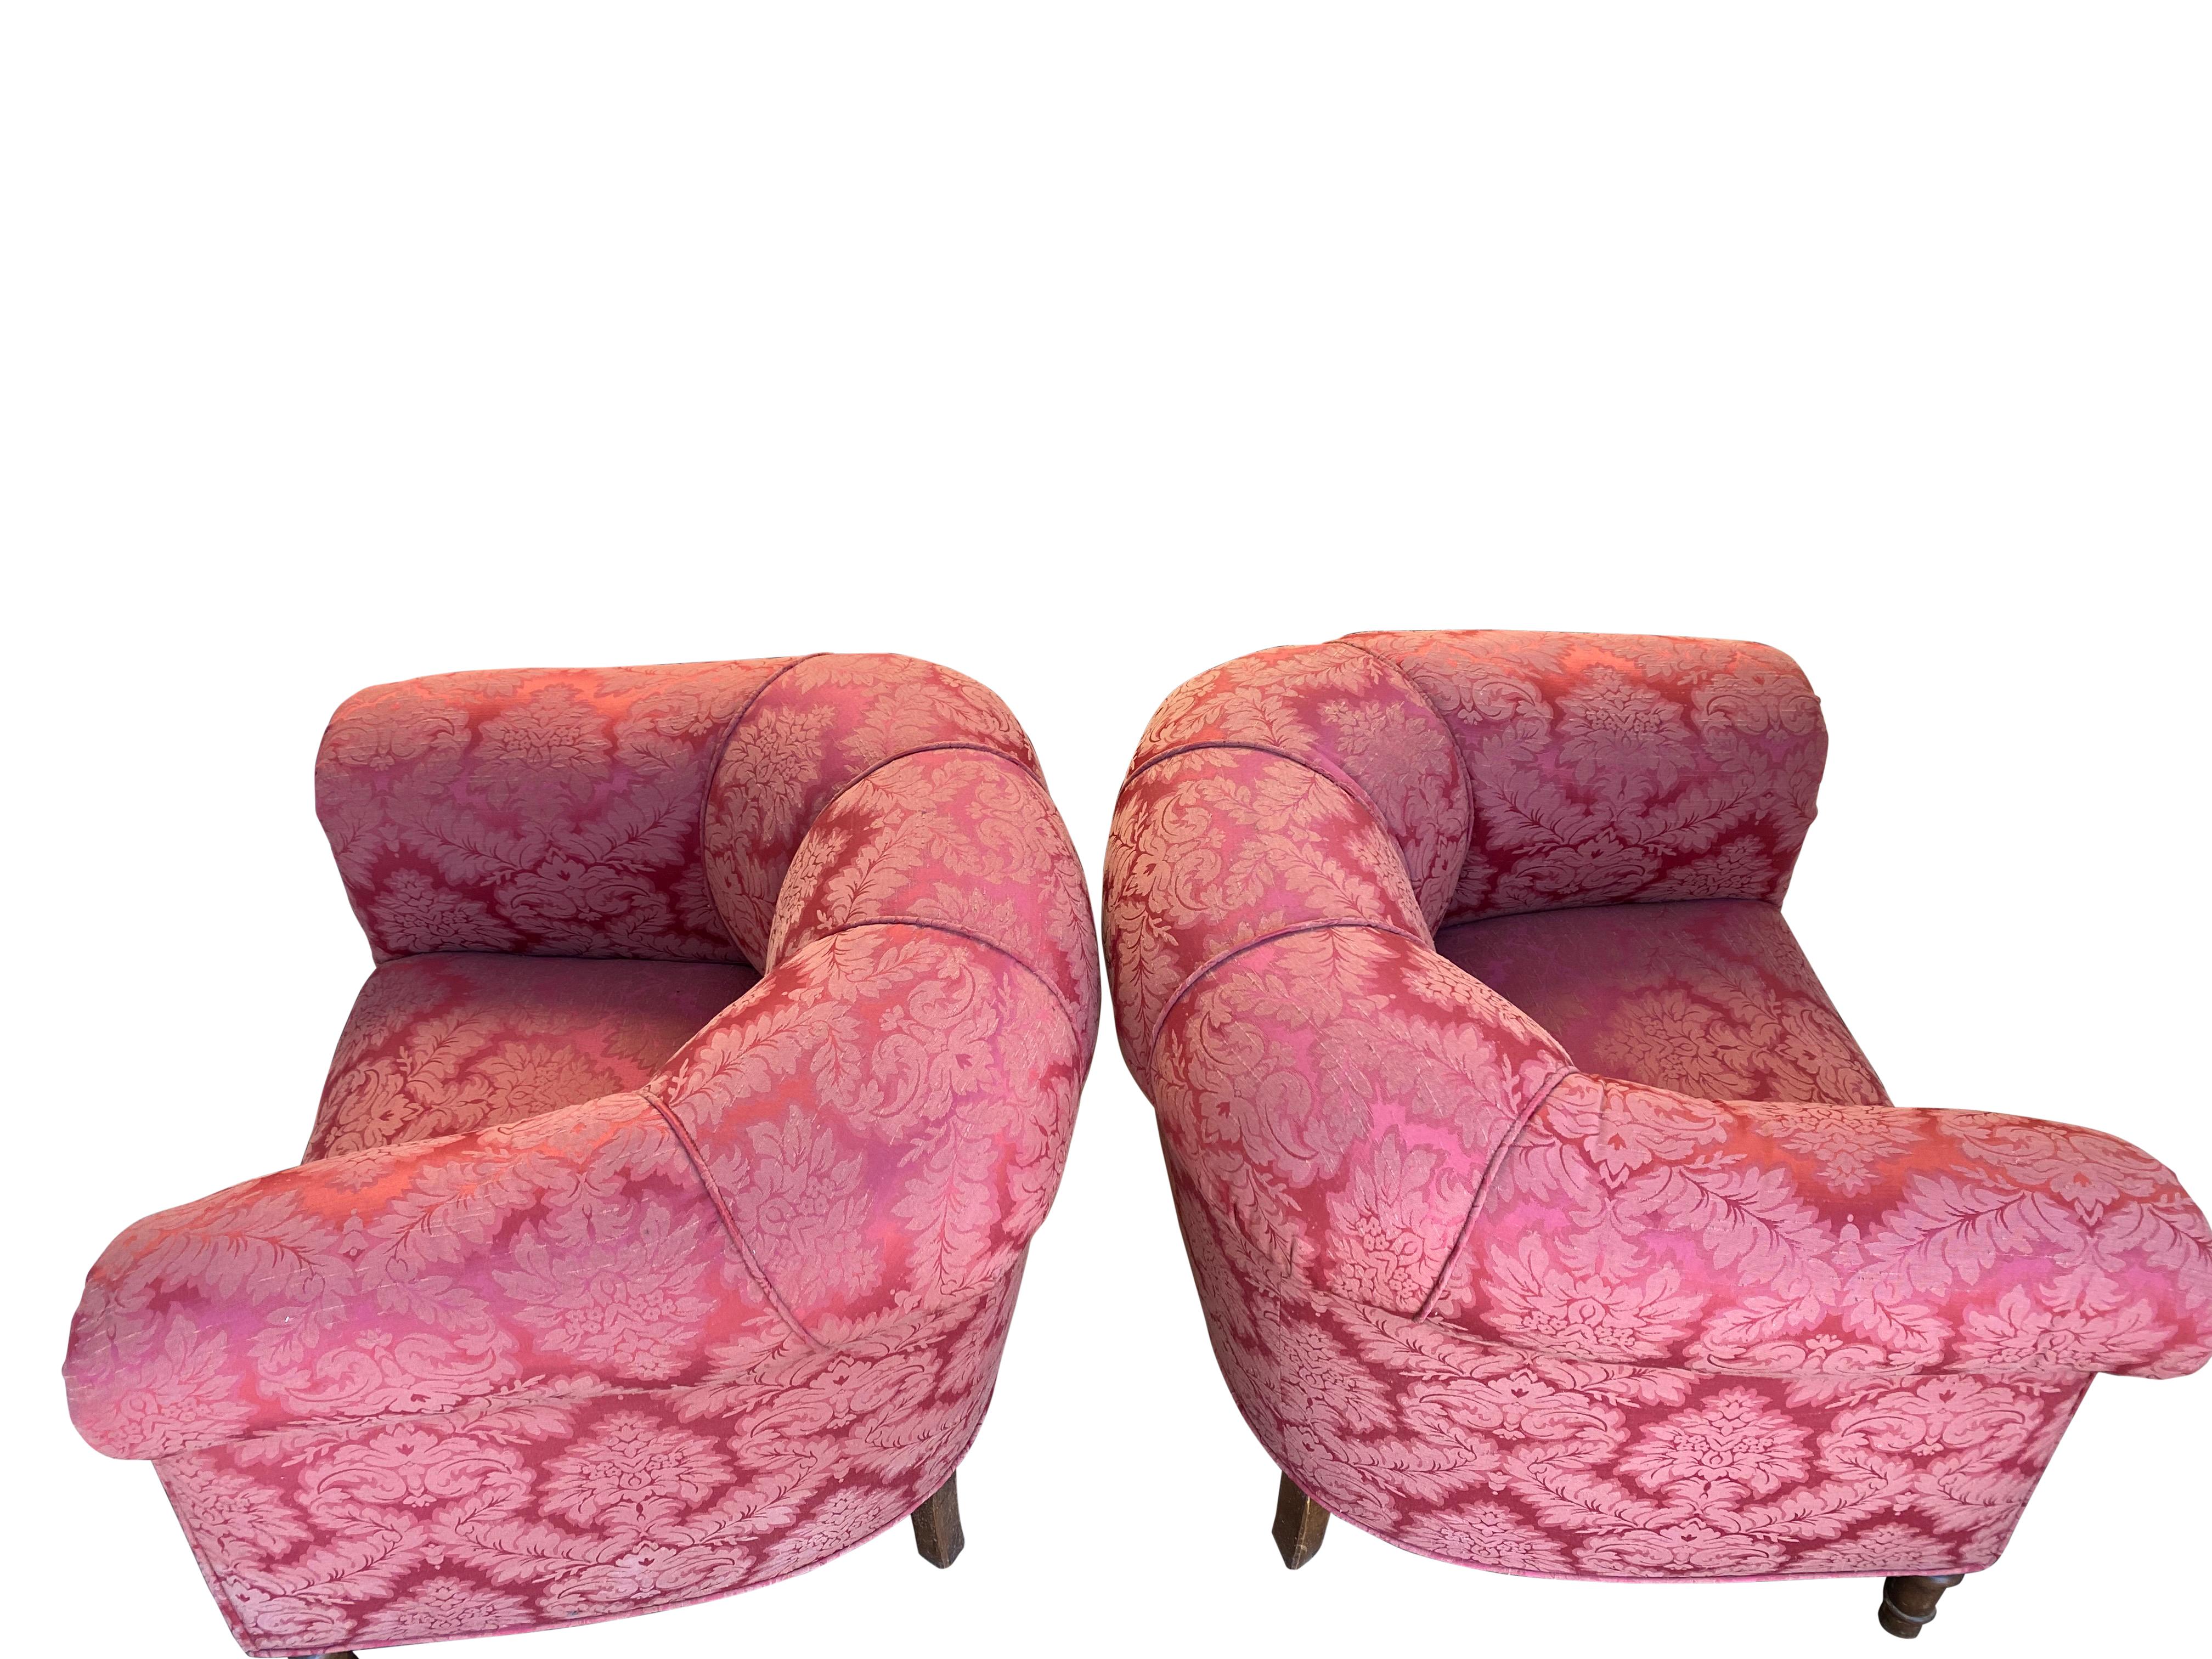 Pair of 1920s Club Chairs in Damask Floral Design For Sale 4